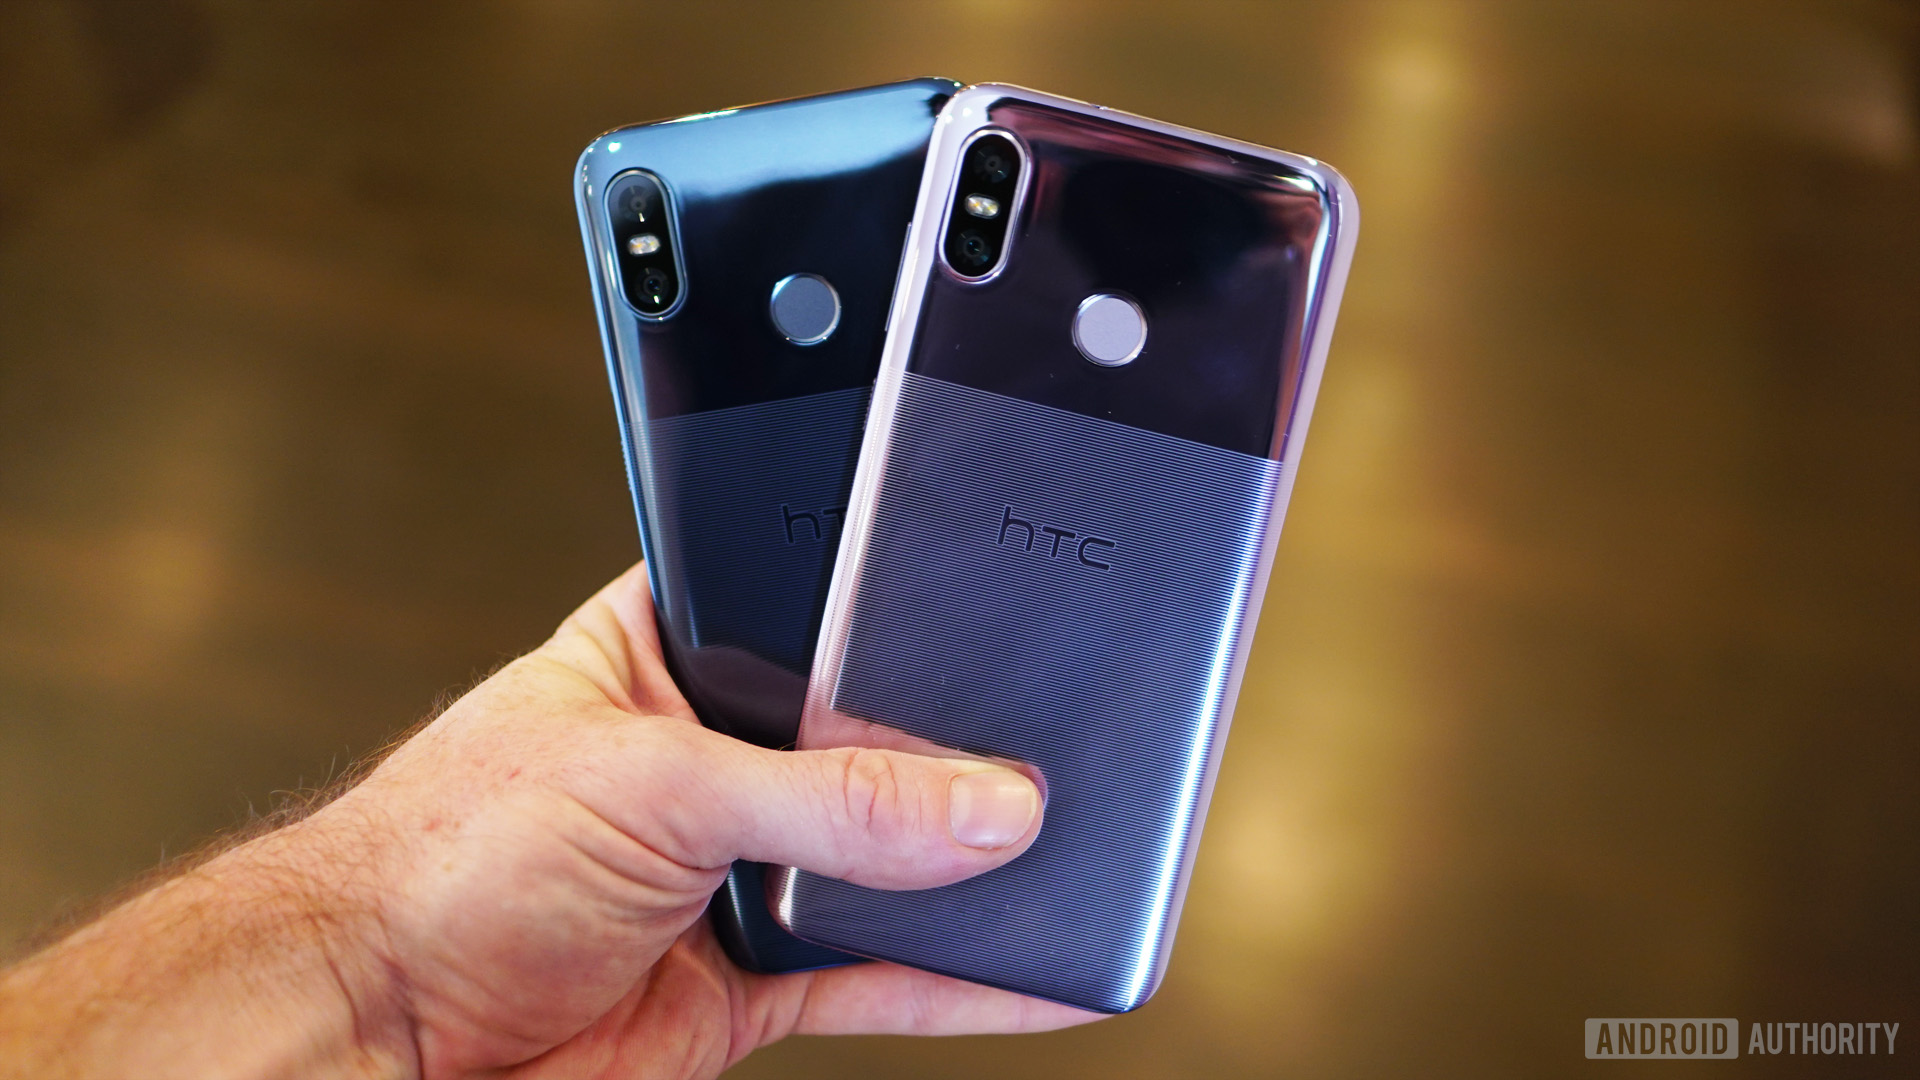 HTC U12 Life Moonlight Blue and Twilight Purple colors in hand